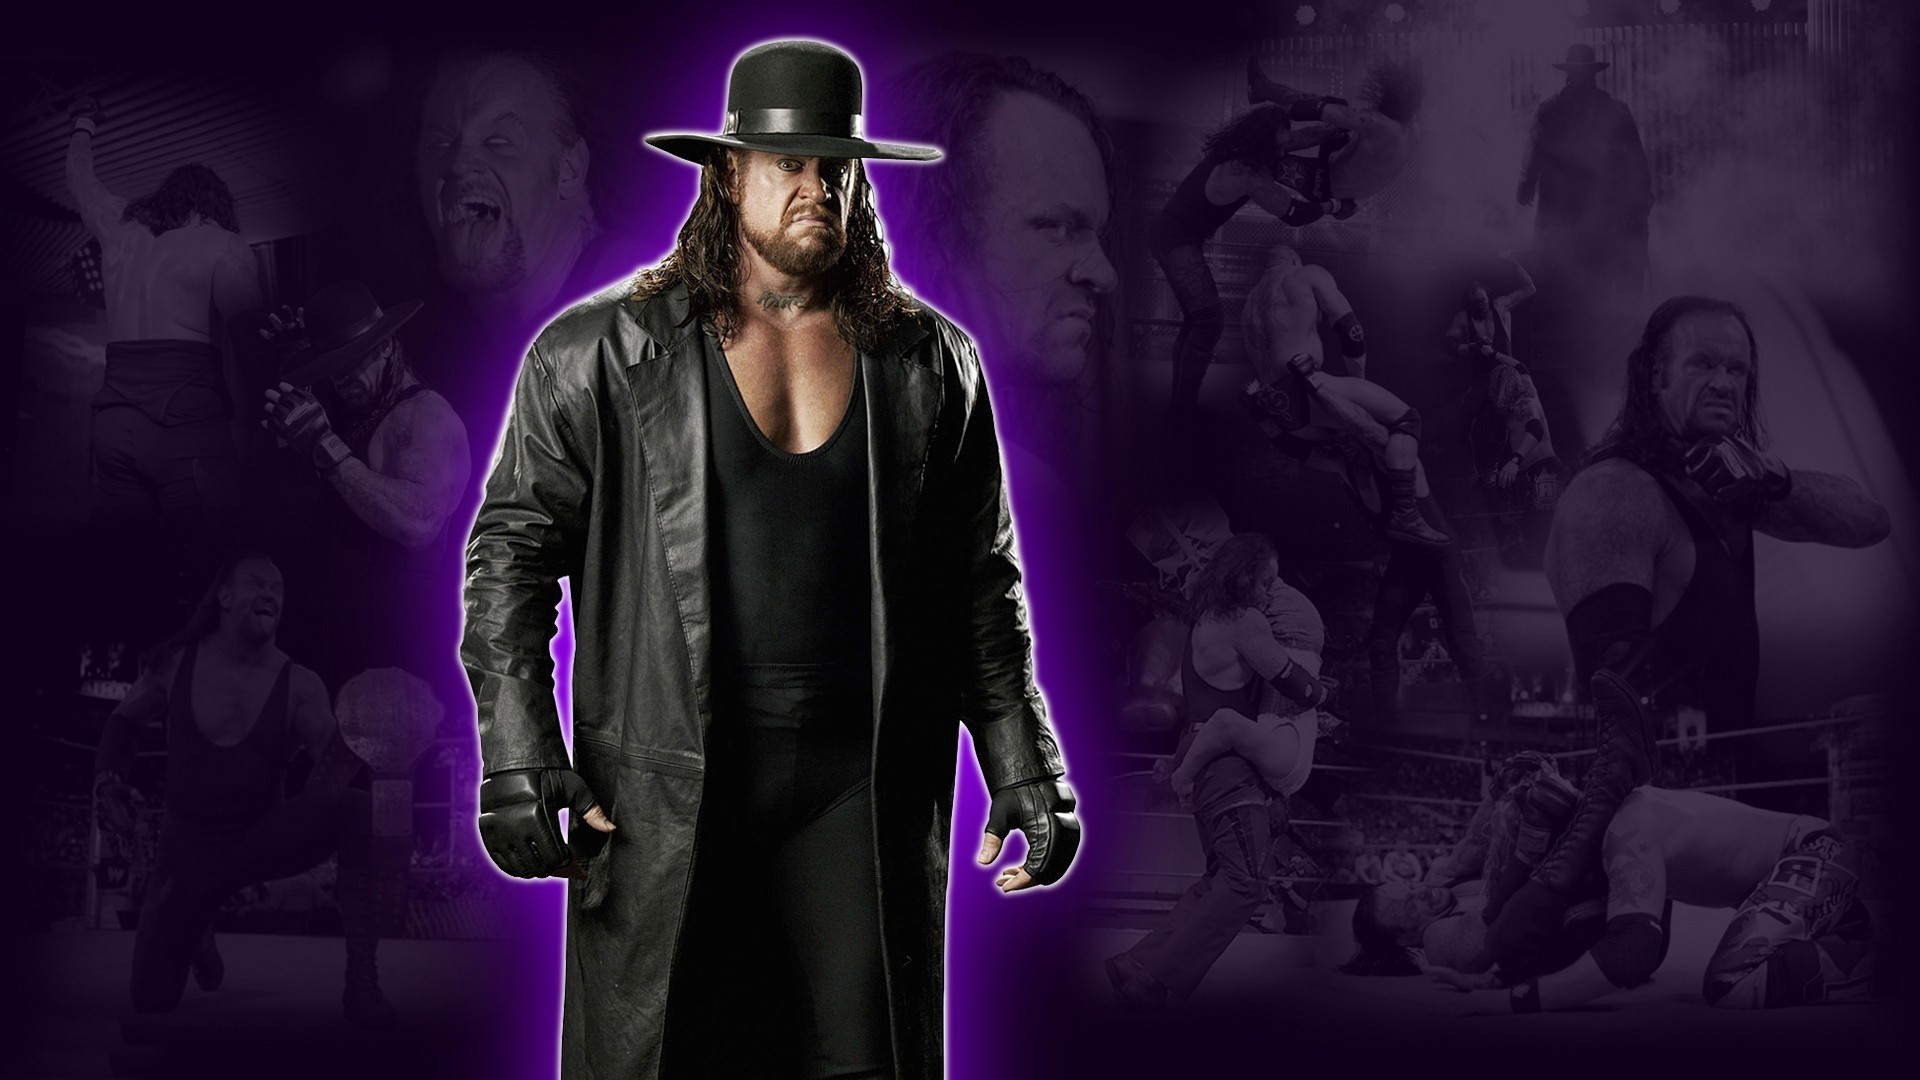 1920x1080  undertaker-hd-images-8 | Undertaker HD Images | Pinterest | Hd  images and Undertaker